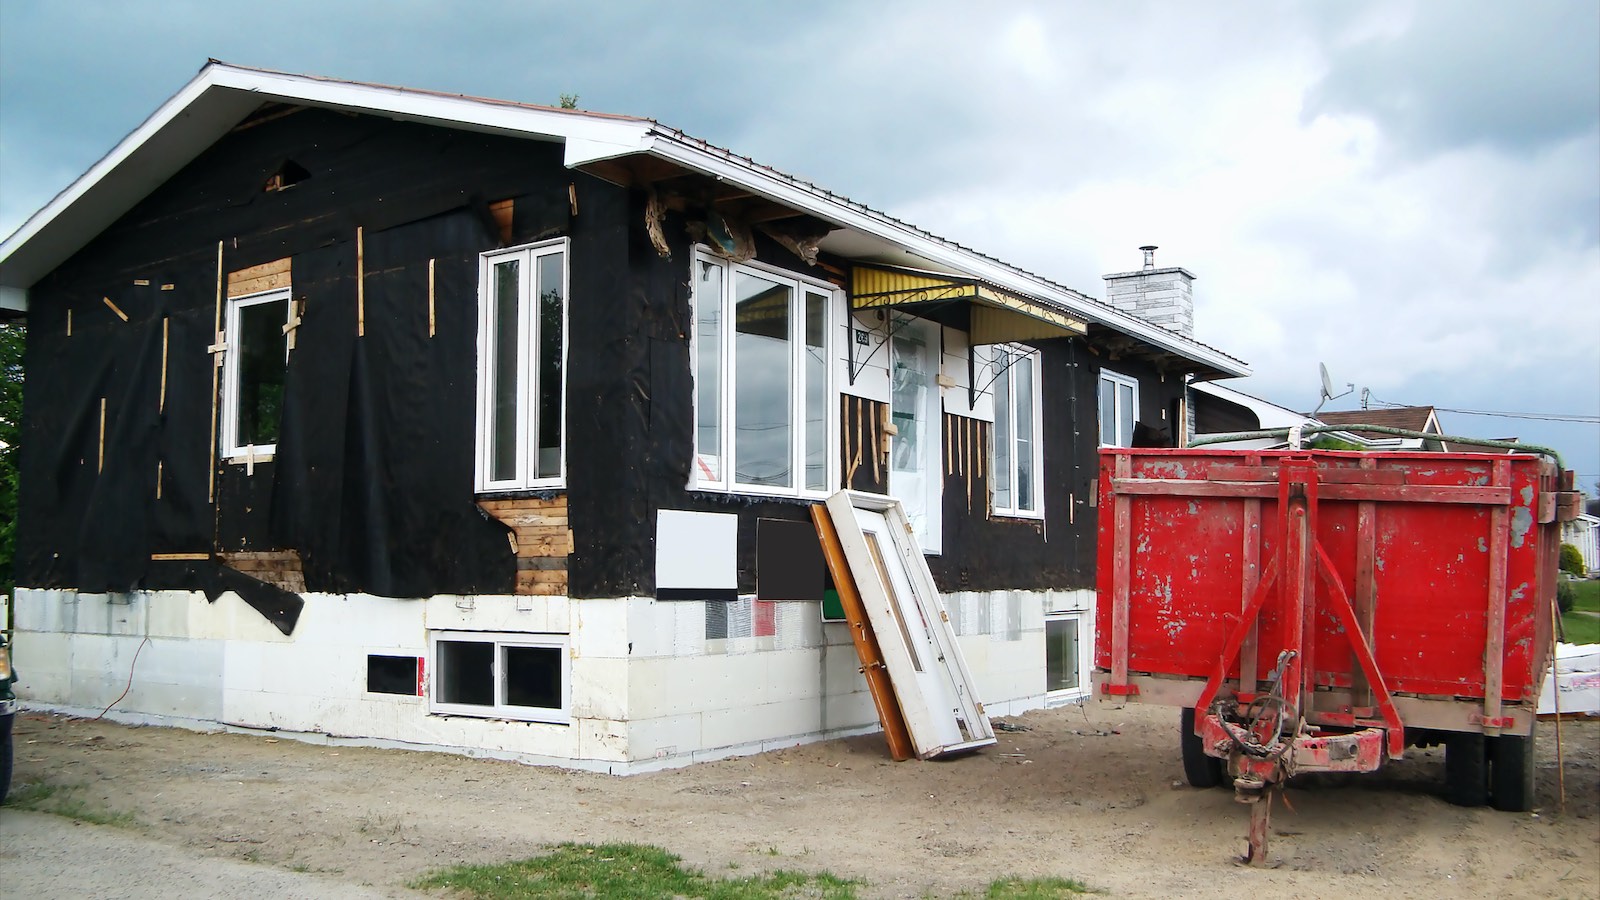 Removed siding on a beach bungalow - is it a teardown?